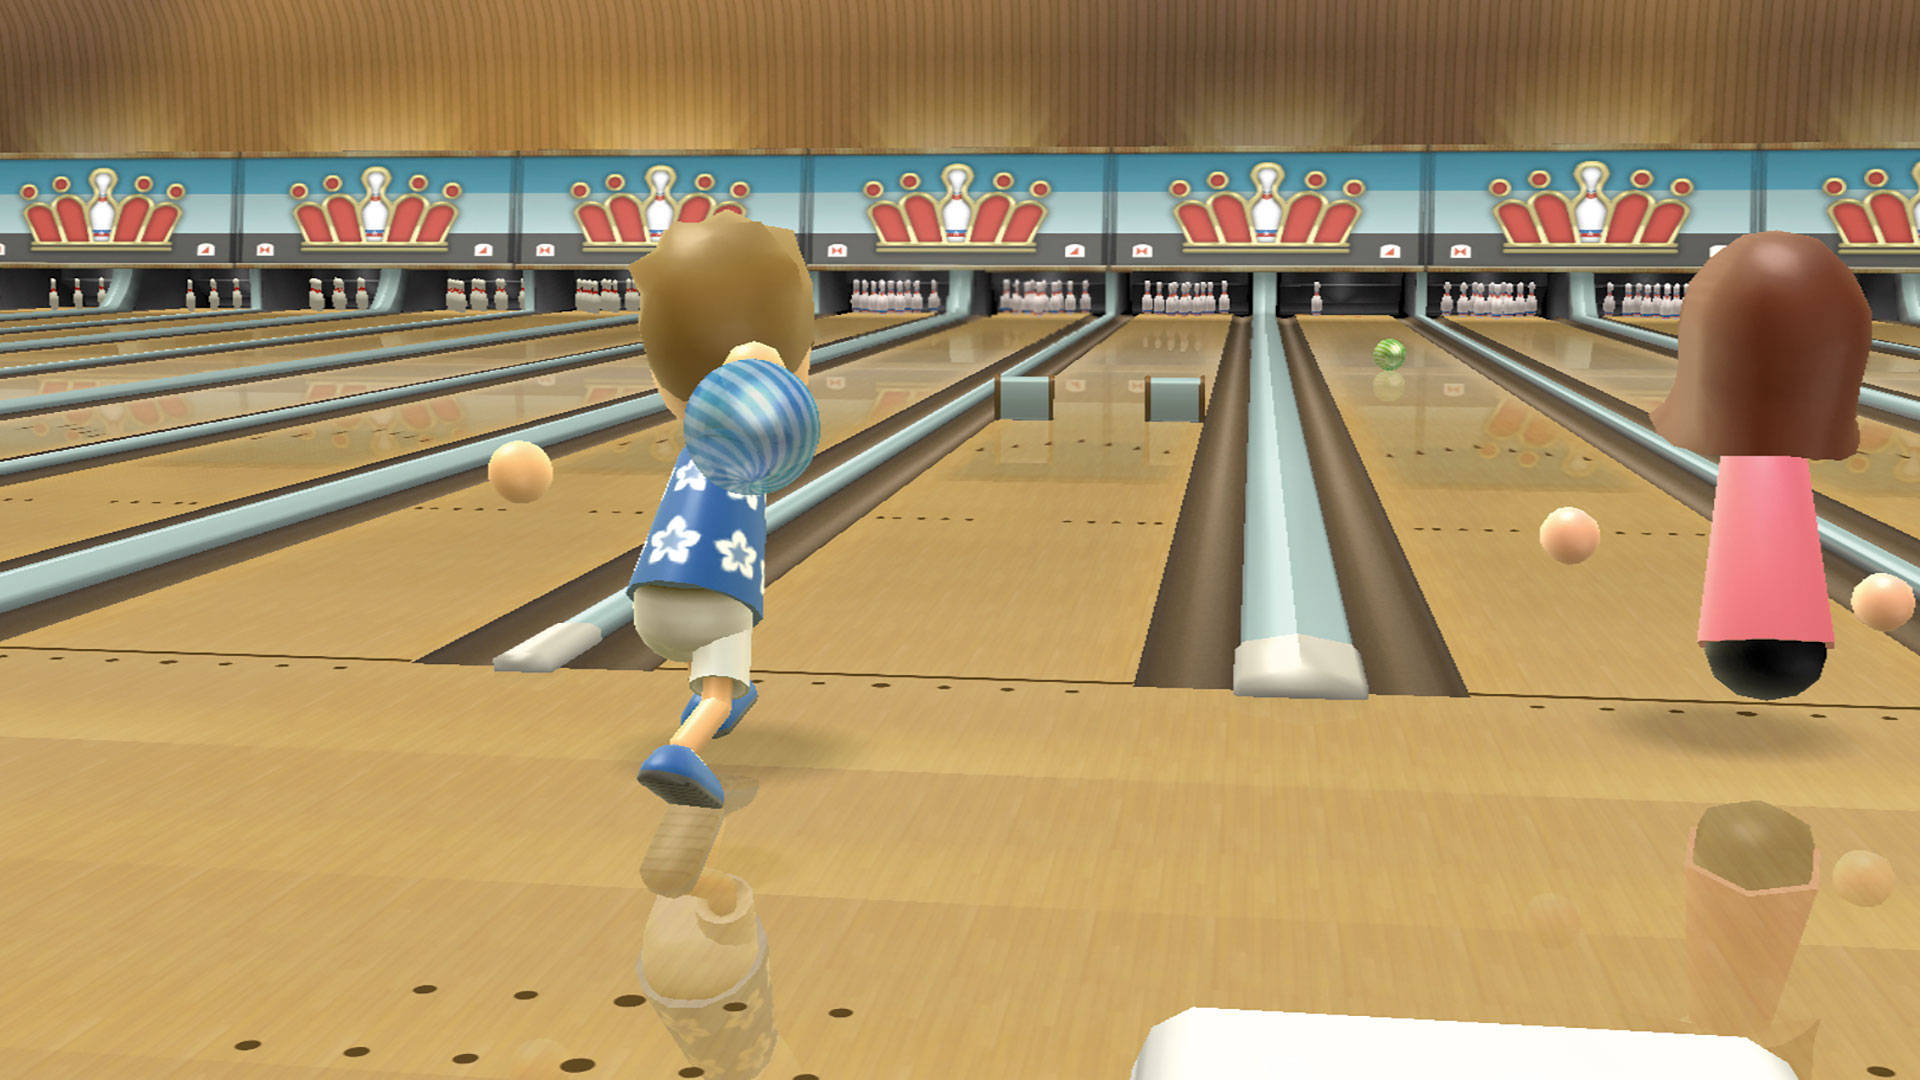 [100+] Wii Sports Wallpapers